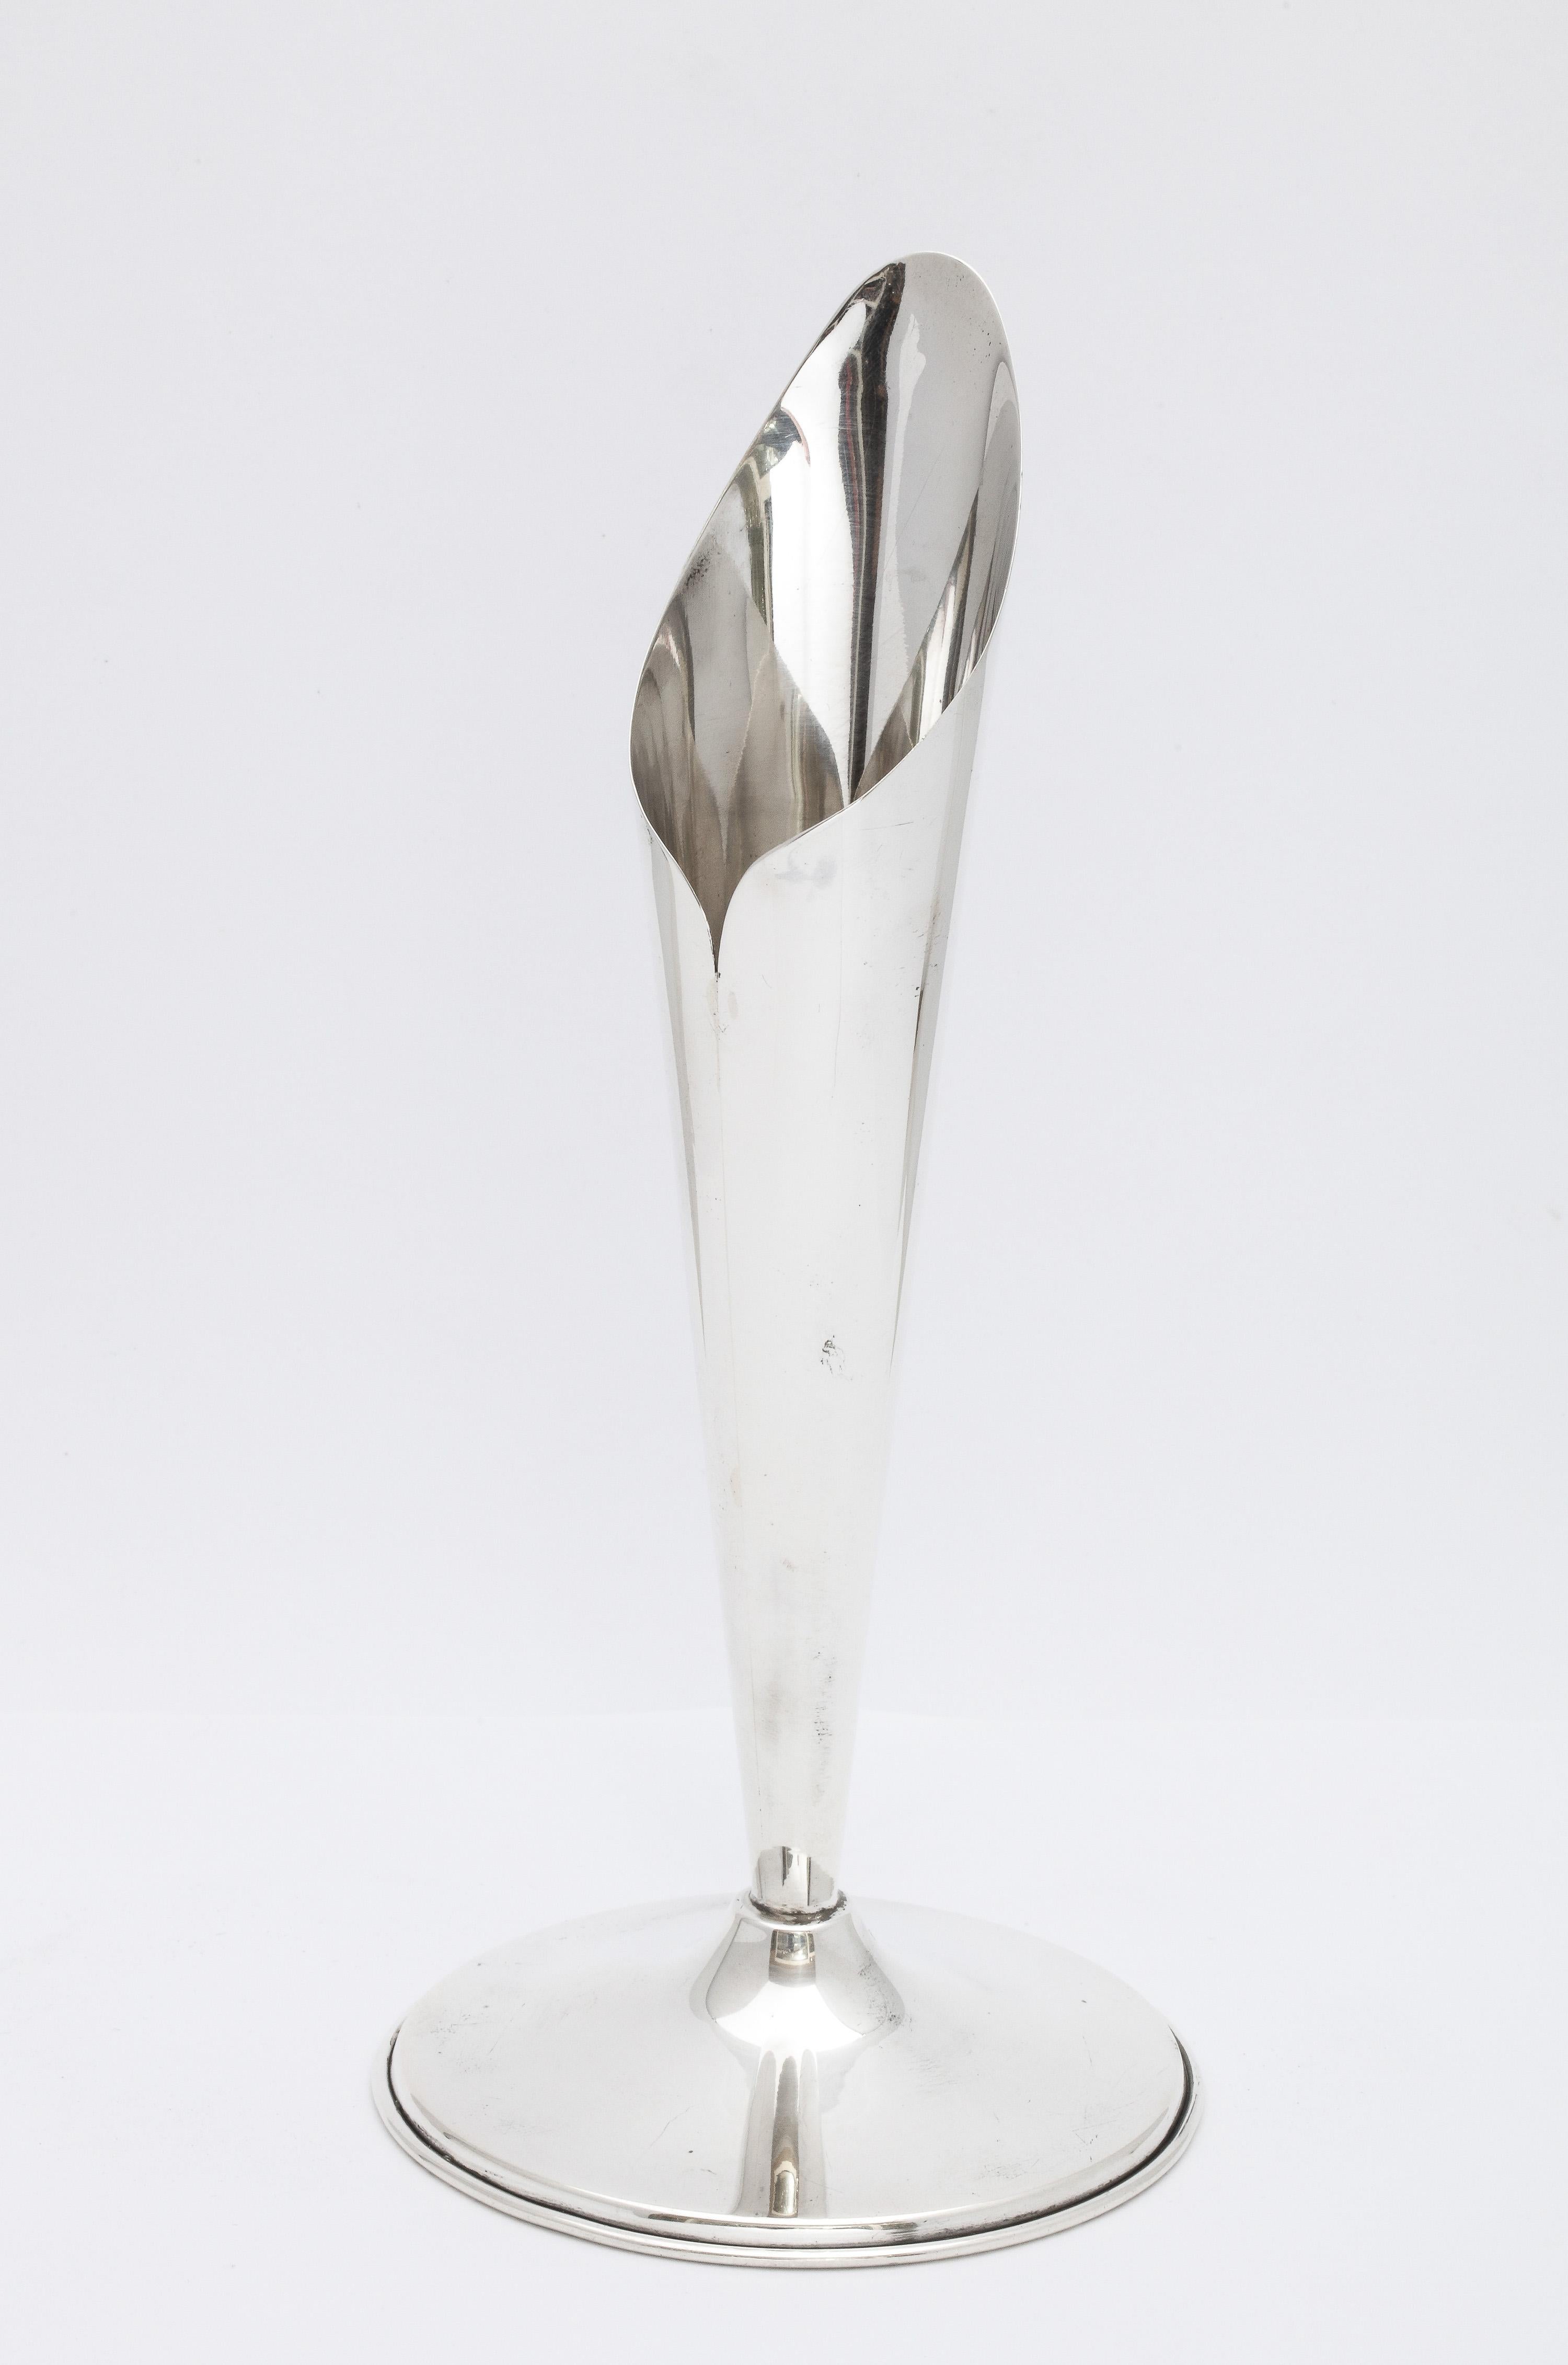 Mid-Century Modern, sterling silver, calla lily-form vase, Mexico, circa 1950s. Measures 8 1/4 inches high x 3 3/4 inches diameter across base. Weighs 3 3/4 troy ounces. Dark spots in photos are reflections. Graceful design. In very good antique